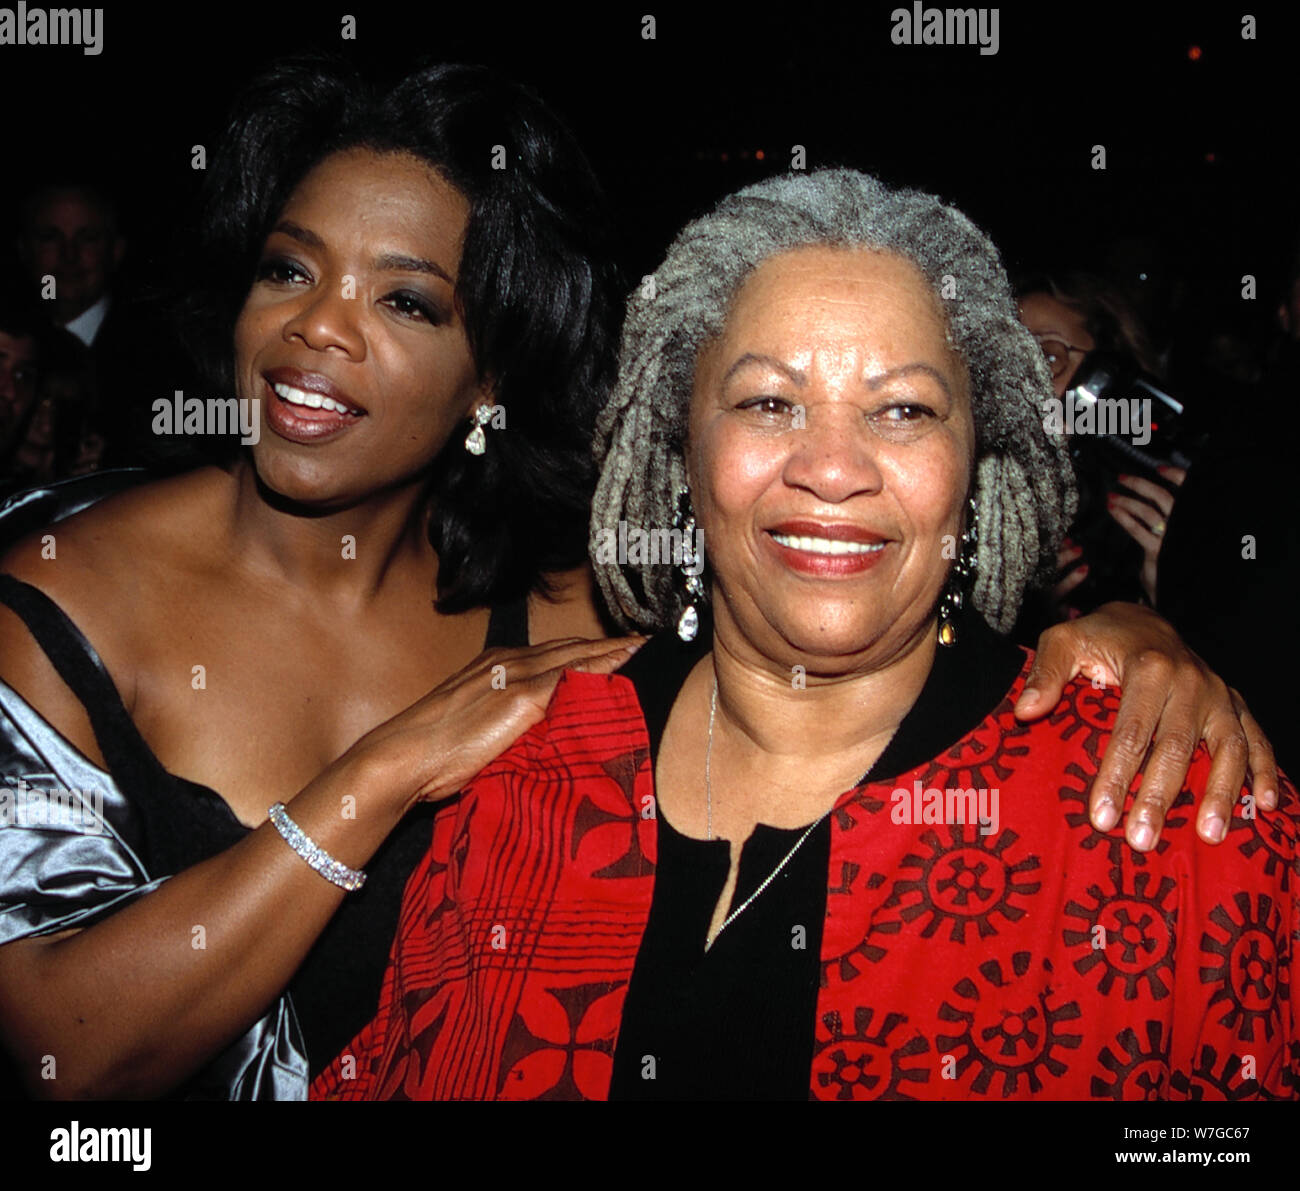 FILE PHOTO*** Author Toni Morrison Has Passed Away At The Age Of 88. Oprah  Winfrey and Toni Morrison attending The Beloved Movie Premiere at the  Ziegfield Theatre, New York City. October 8,